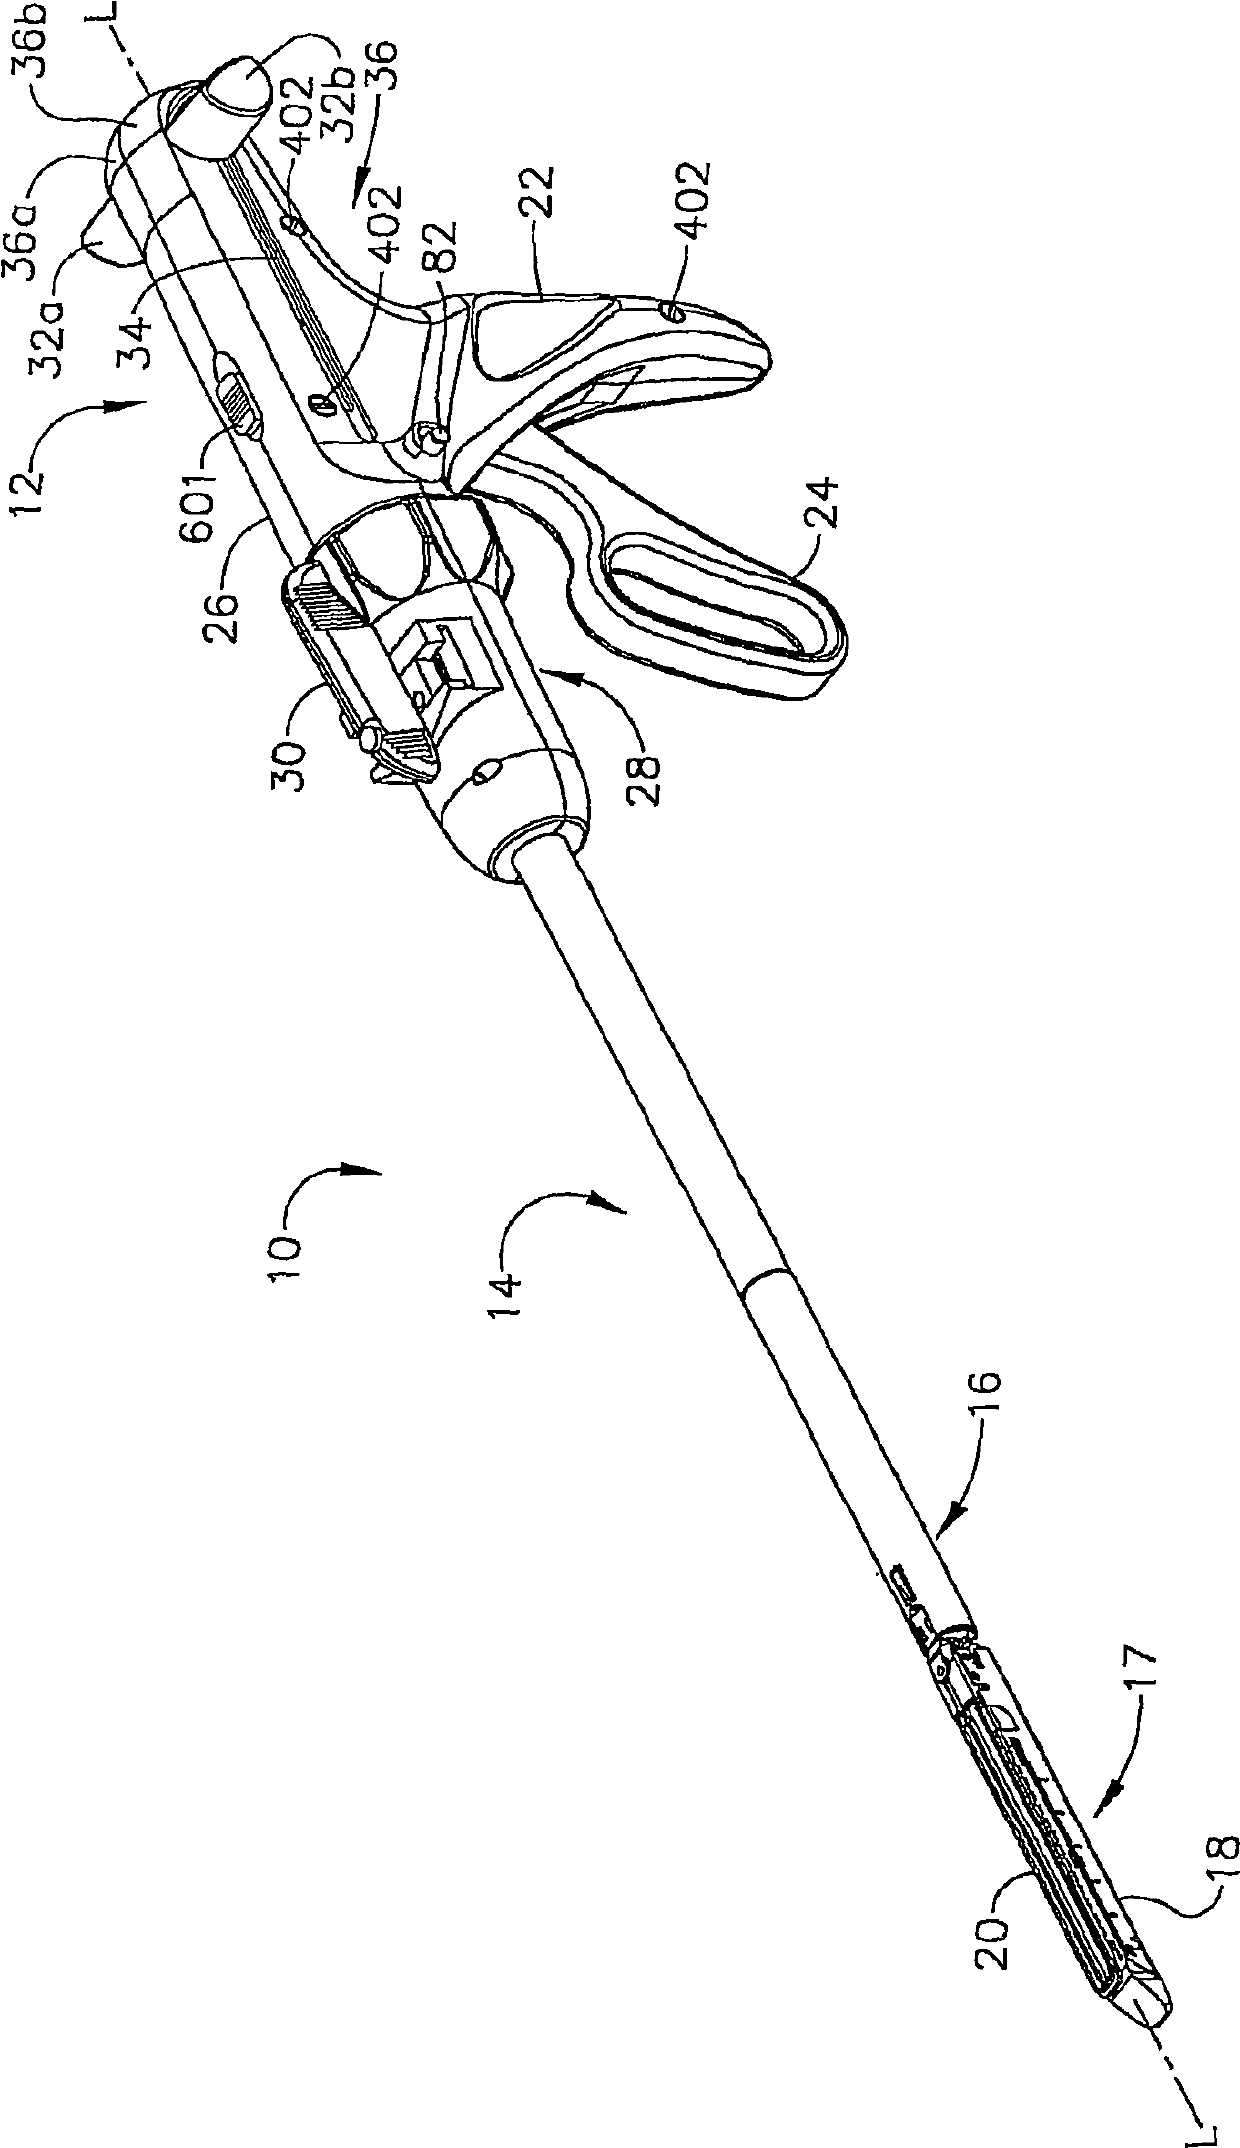 Surgical stapling apparatus with control features operable with one hand